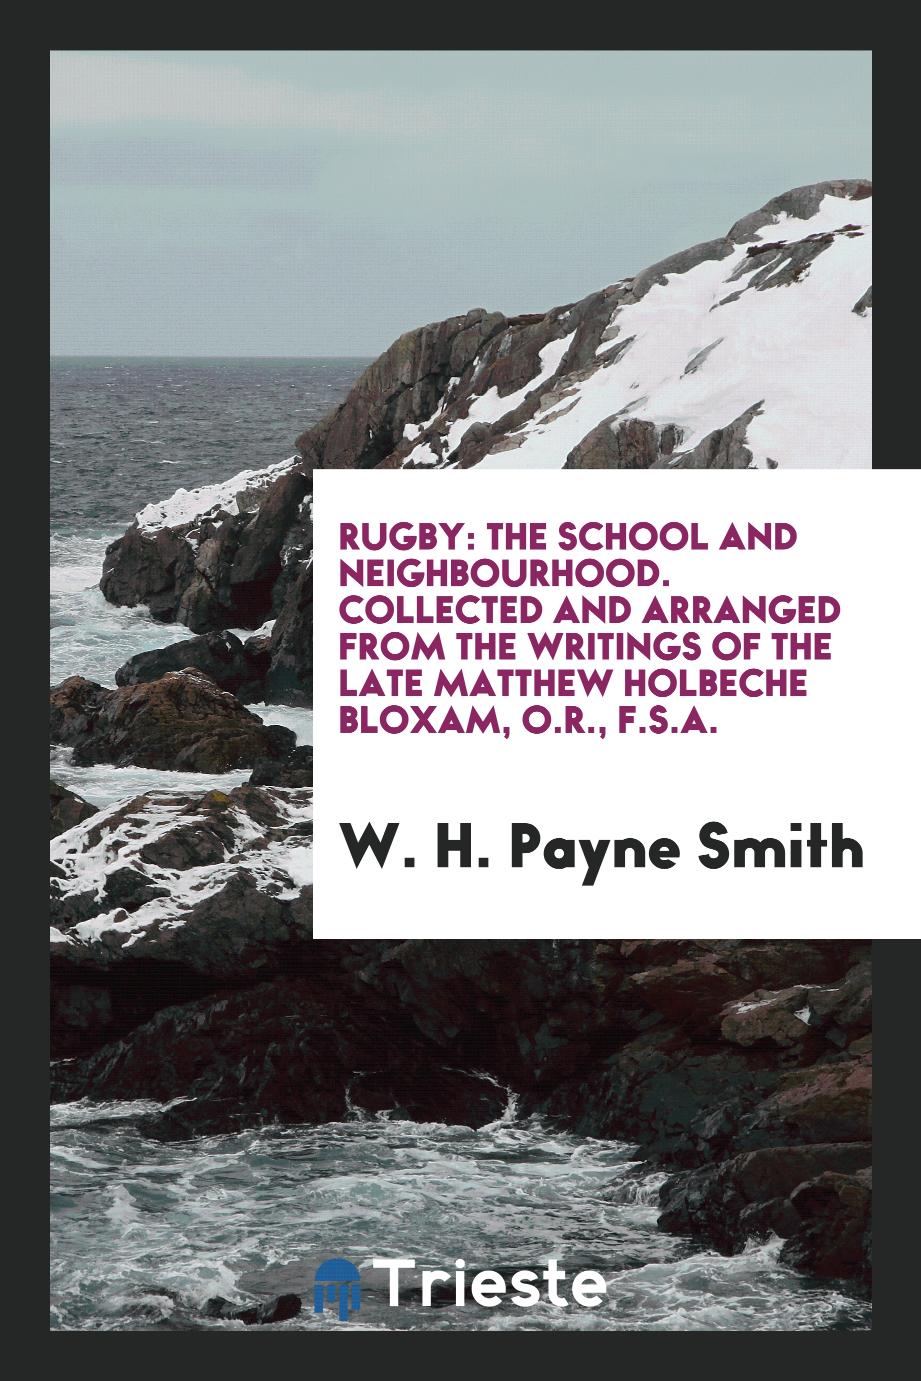 Rugby: The School and Neighbourhood. Collected and Arranged from the Writings of the Late Matthew Holbeche Bloxam, O.R., F.S.A.